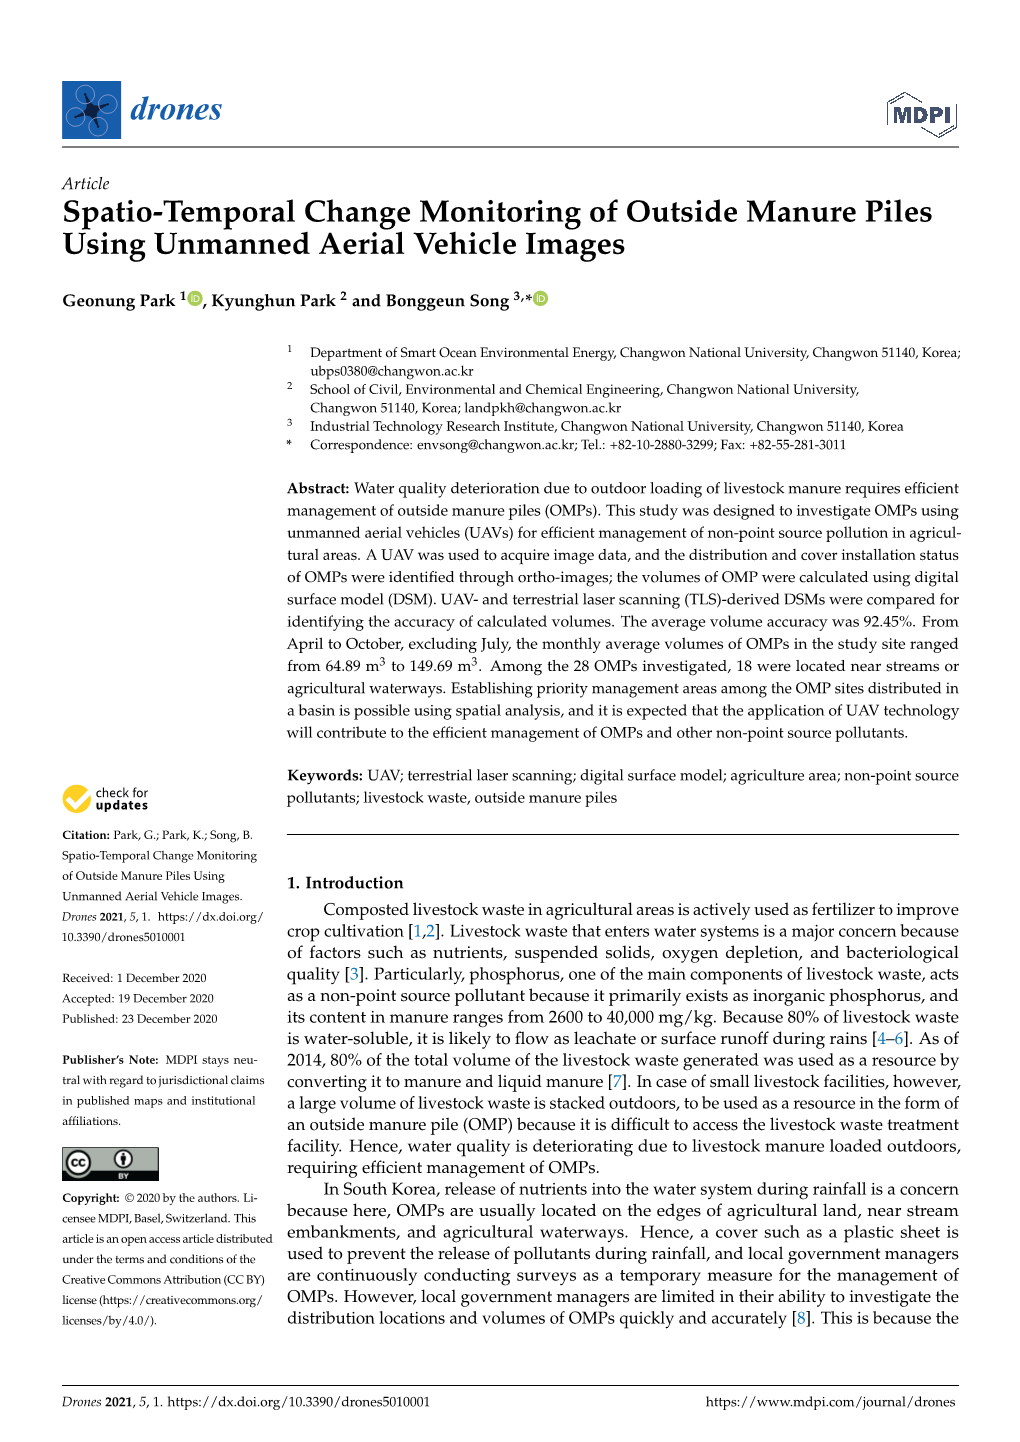 Spatio-Temporal Change Monitoring of Outside Manure Piles Using Unmanned Aerial Vehicle Images